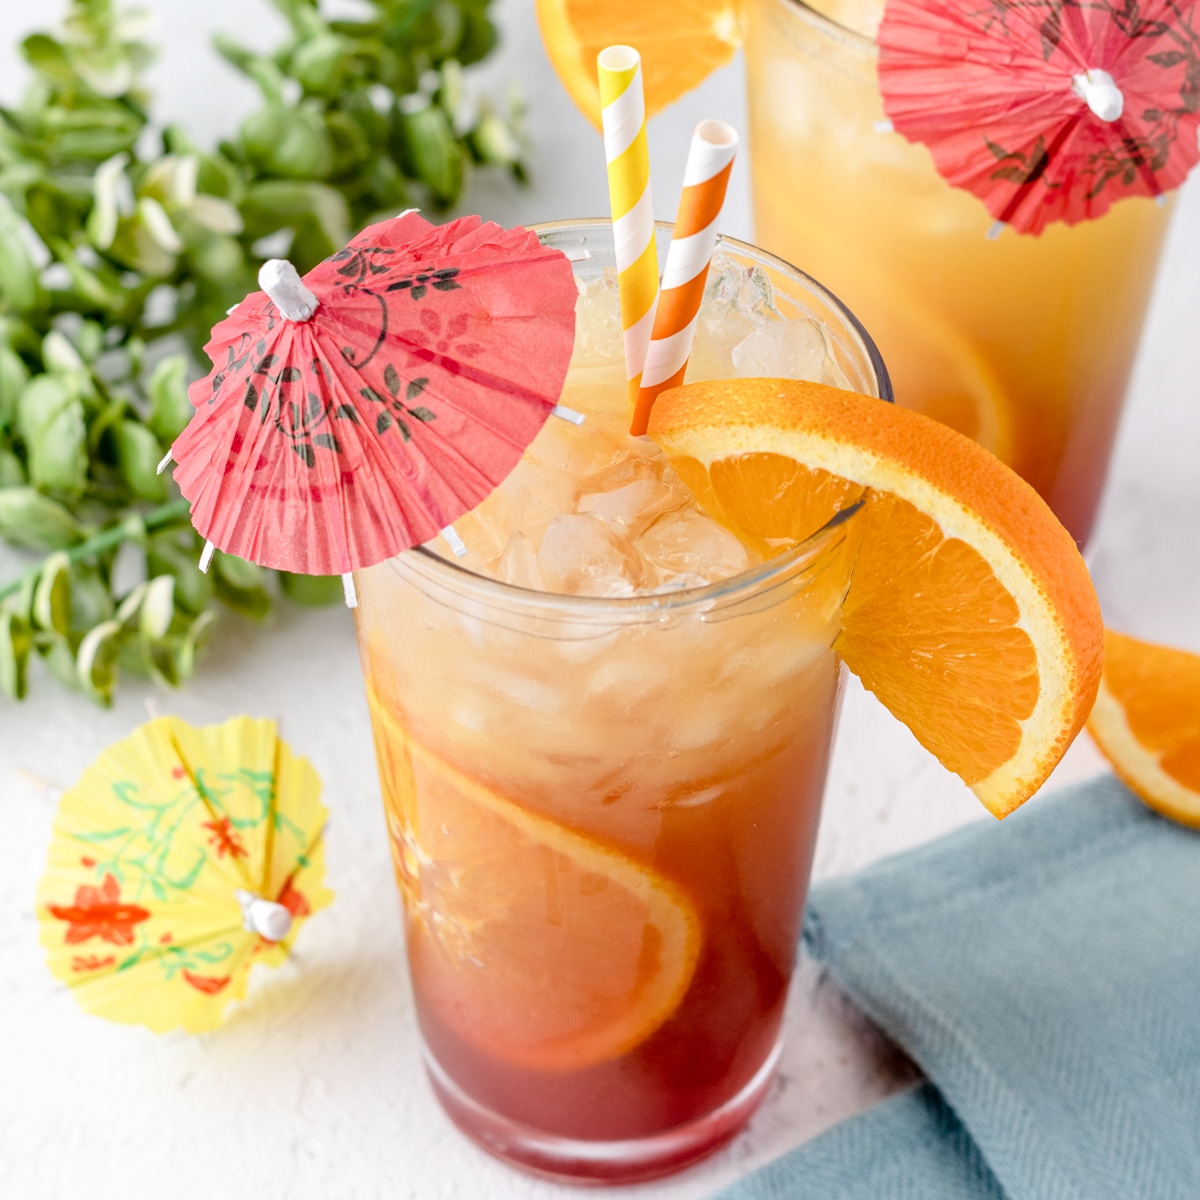 Sunrise Mocktail Spritzer with flavors of orange, pineapple, and pomegranate. Homemade grenadine recipe included.